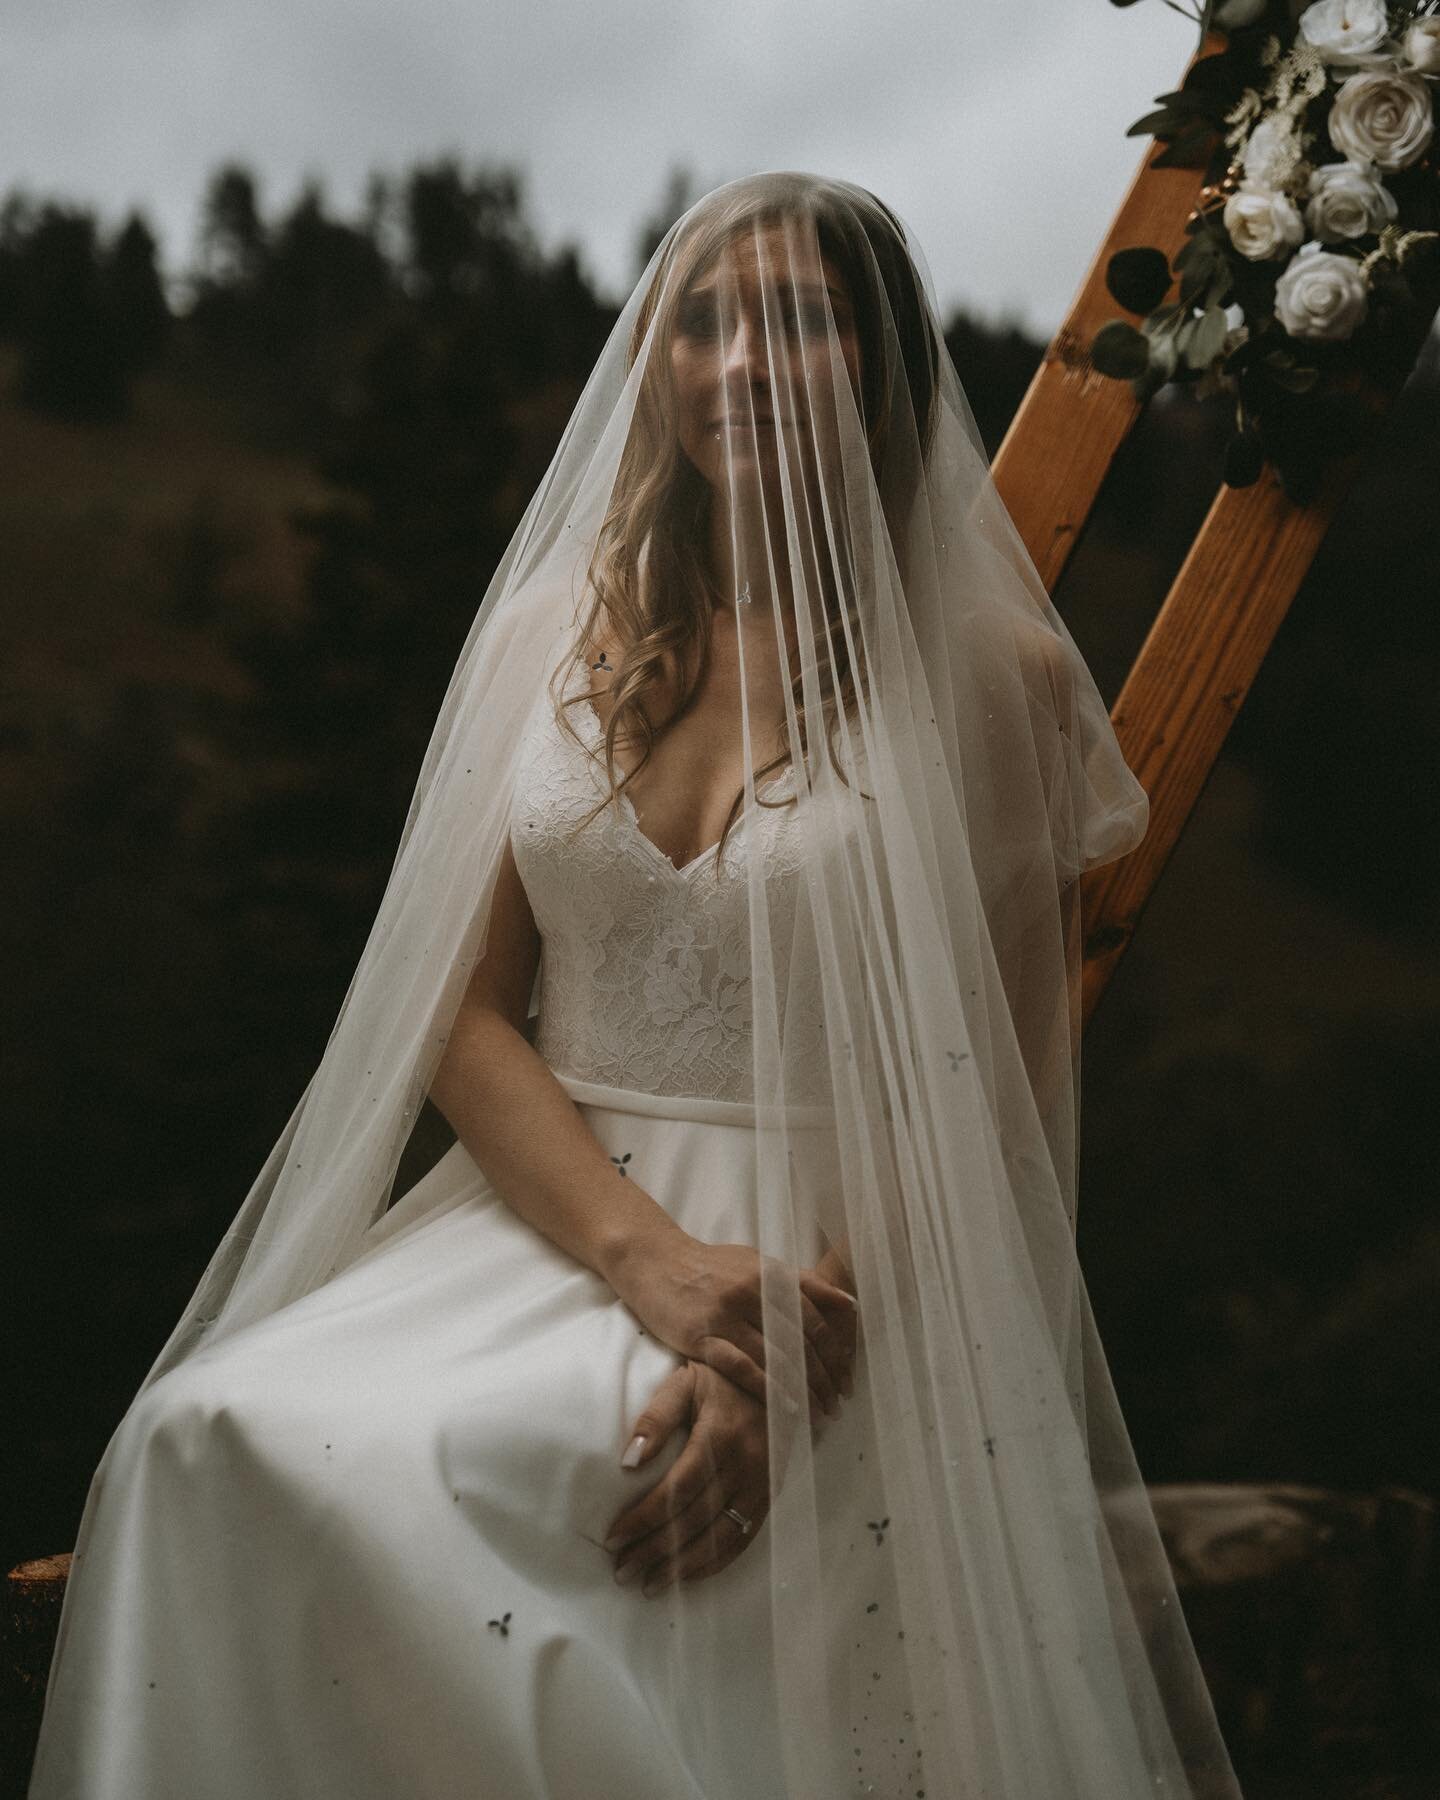 Your wedding day is a momentous occasion that should reflect your unique style and interests. For this couple, their love for the great outdoors inspired a breathtakingly simple ceremony nestled in the Tehachapi Mountains. Surrounded by the natural b